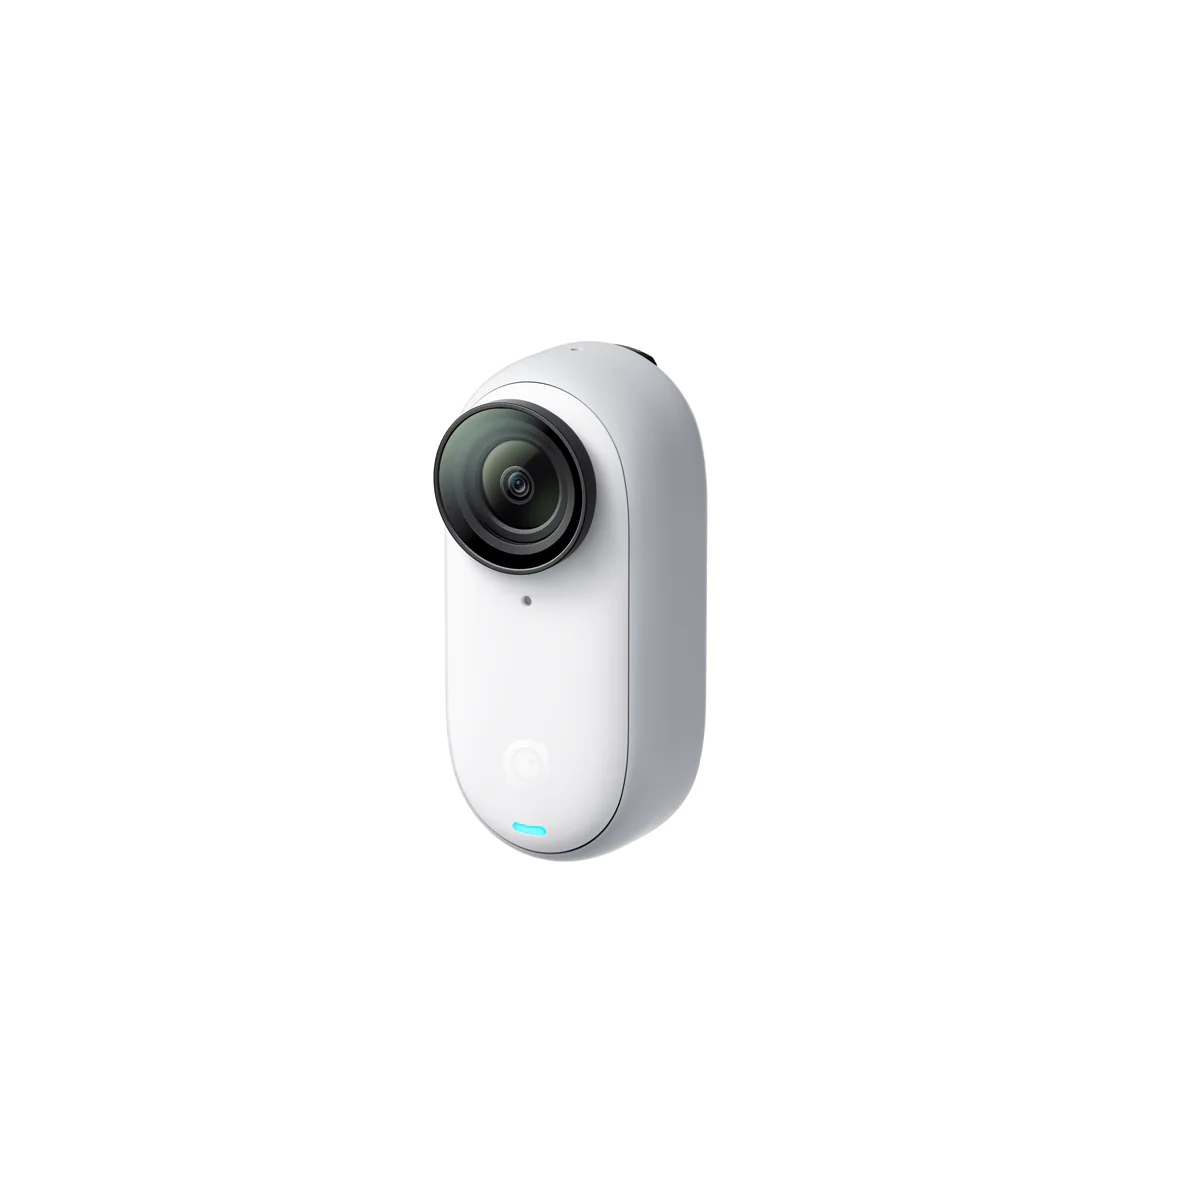 Insta360 GO 3 Action Camera, White - 64GB with Sport Kit